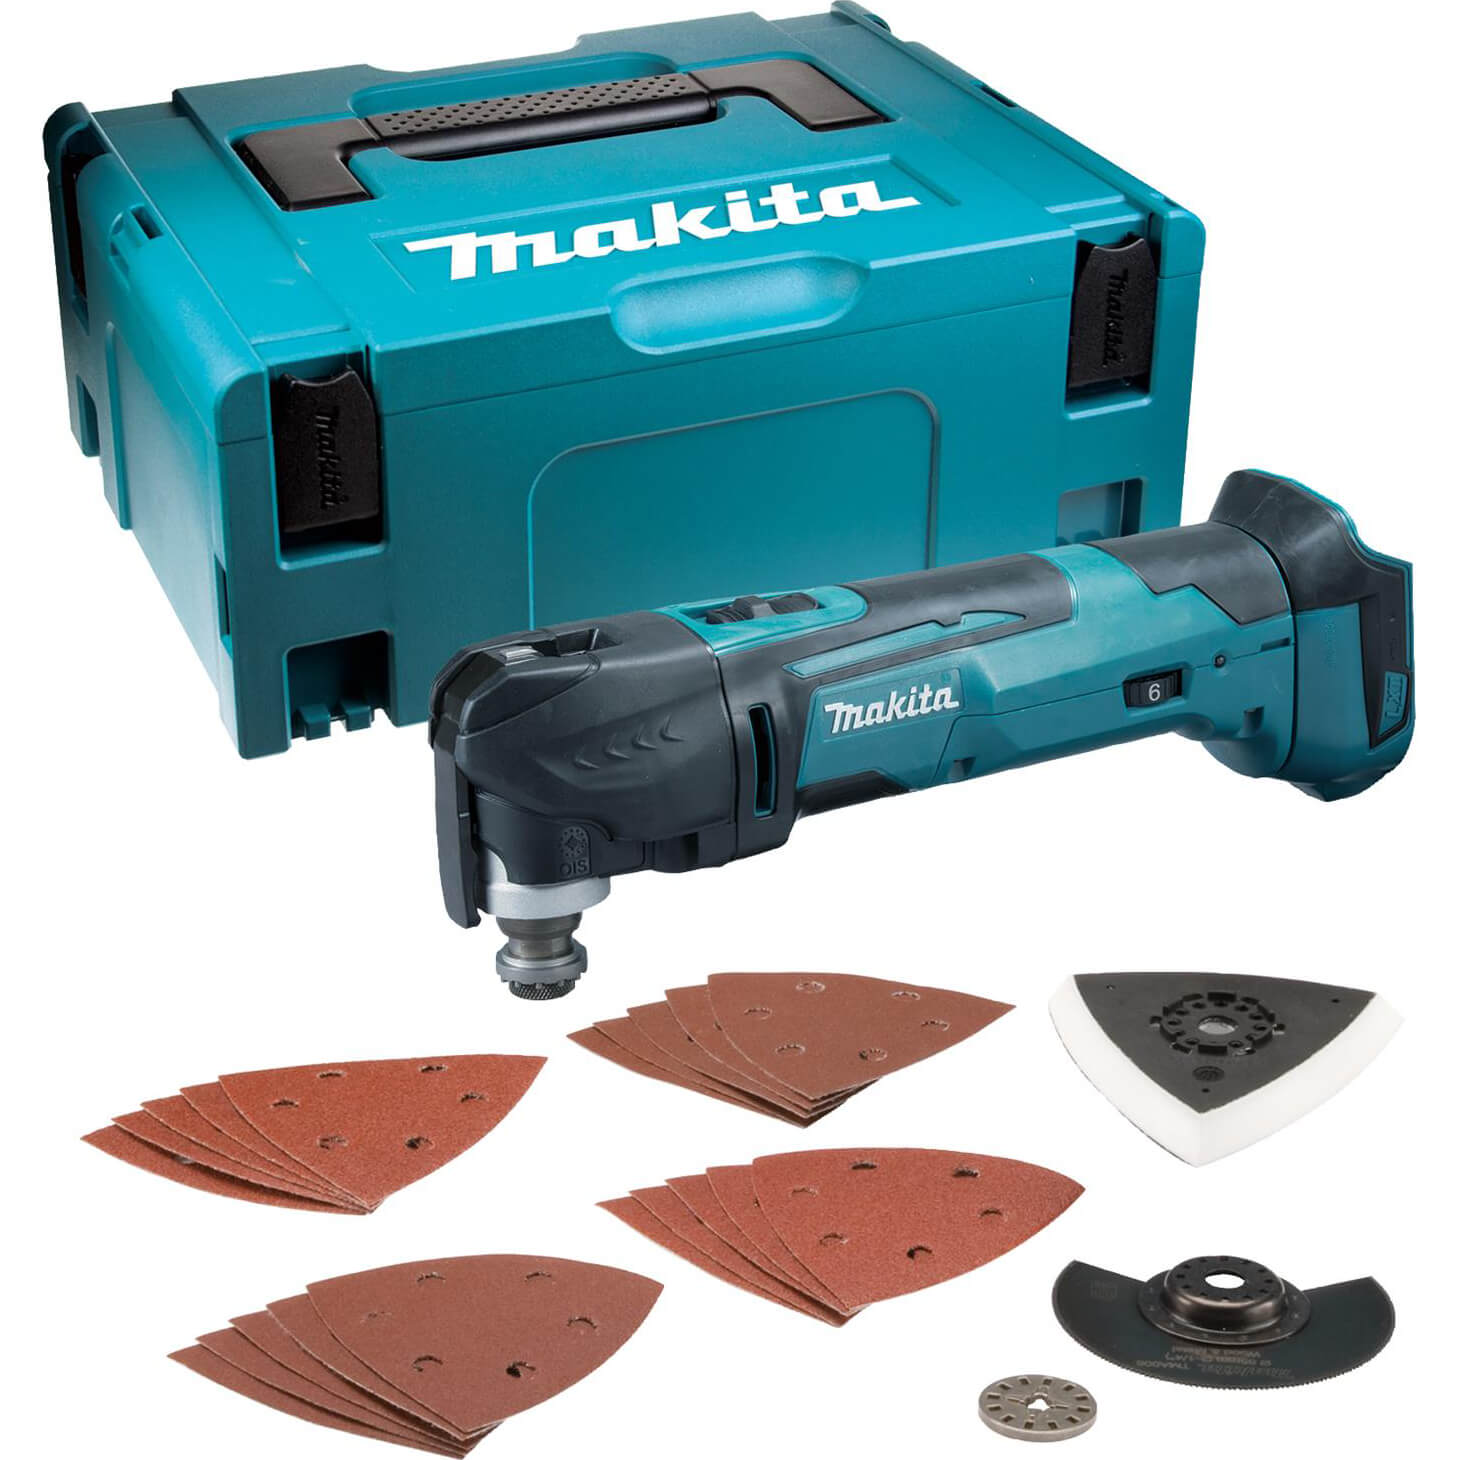 Image of Makita DTM51 18v LXT Cordless Oscillating Multi Tool No Batteries No Charger Case & Accessories